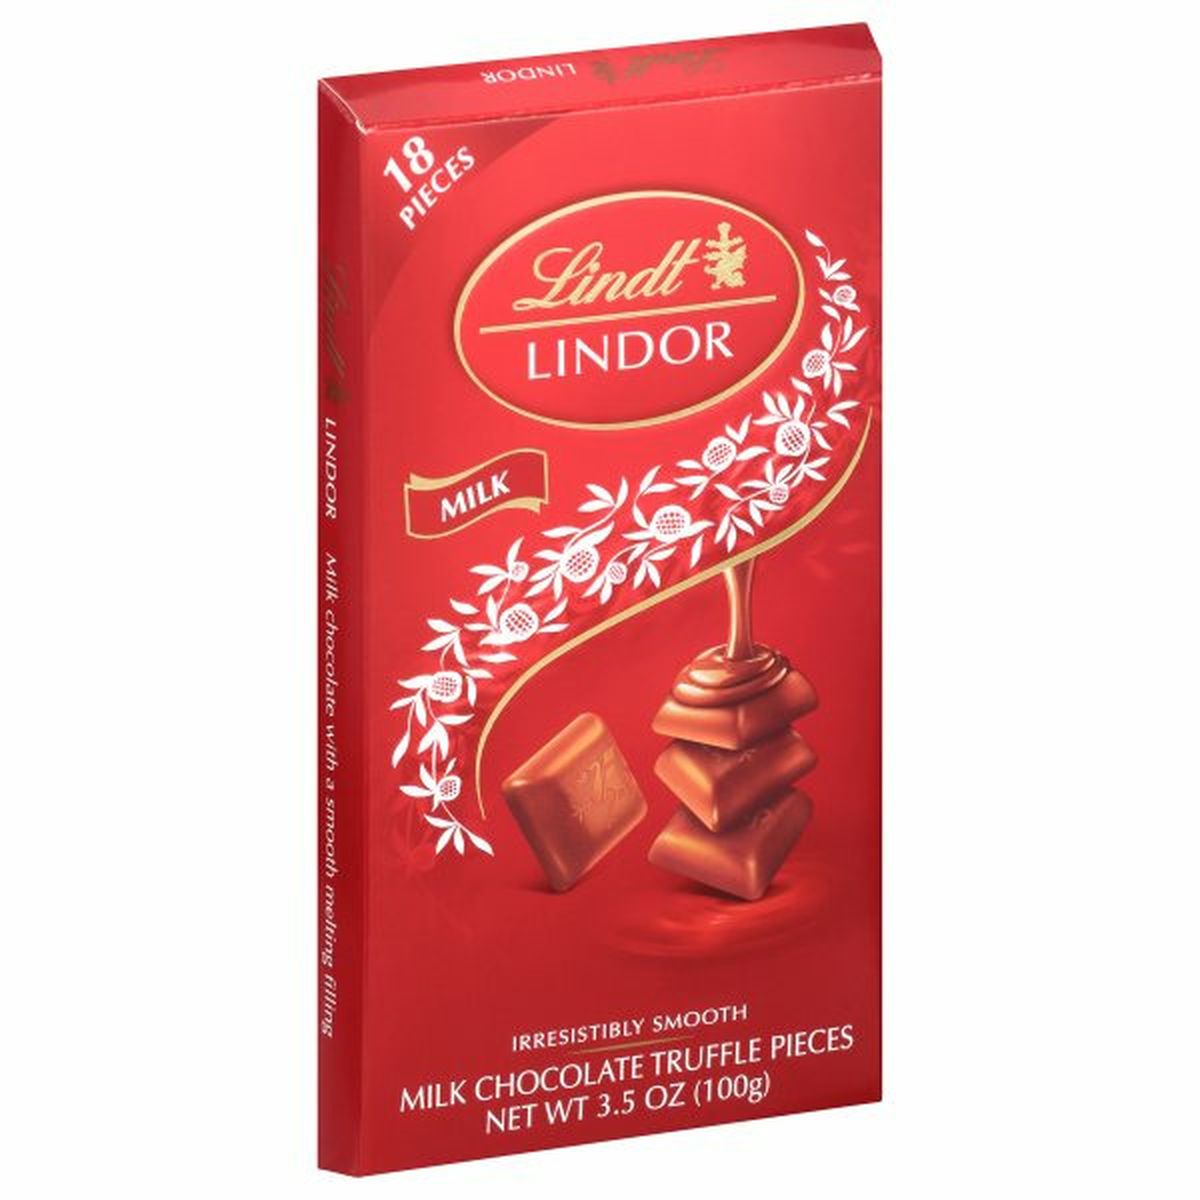 Calories in Lindt Truffle Pieces, Milk Chocolate